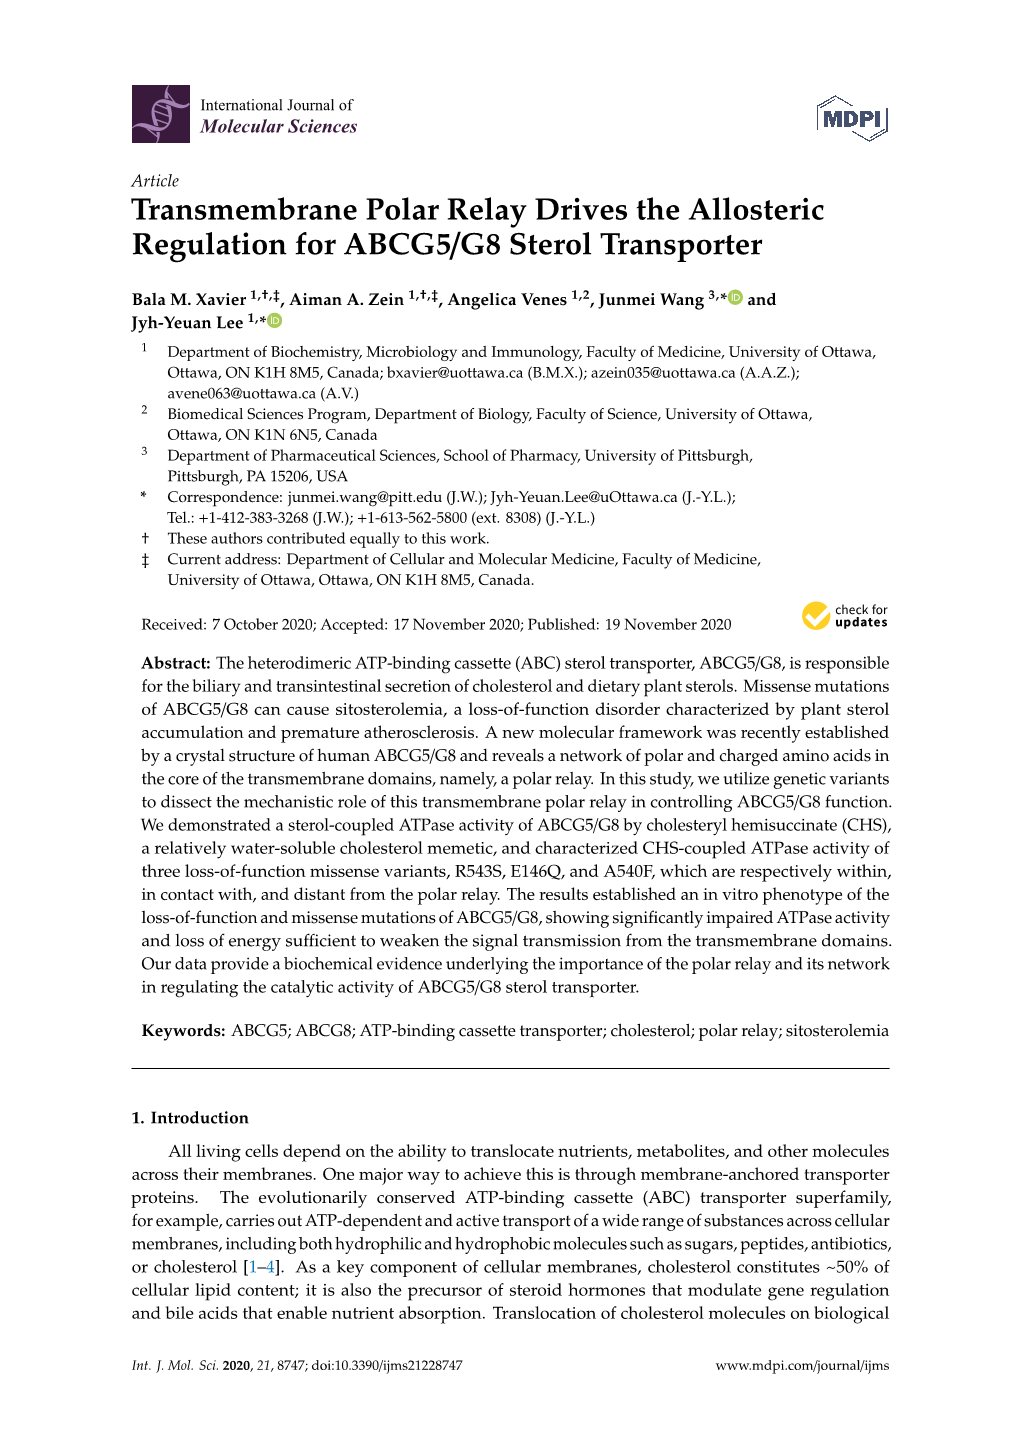 Transmembrane Polar Relay Drives the Allosteric Regulation for ABCG5/G8 Sterol Transporter